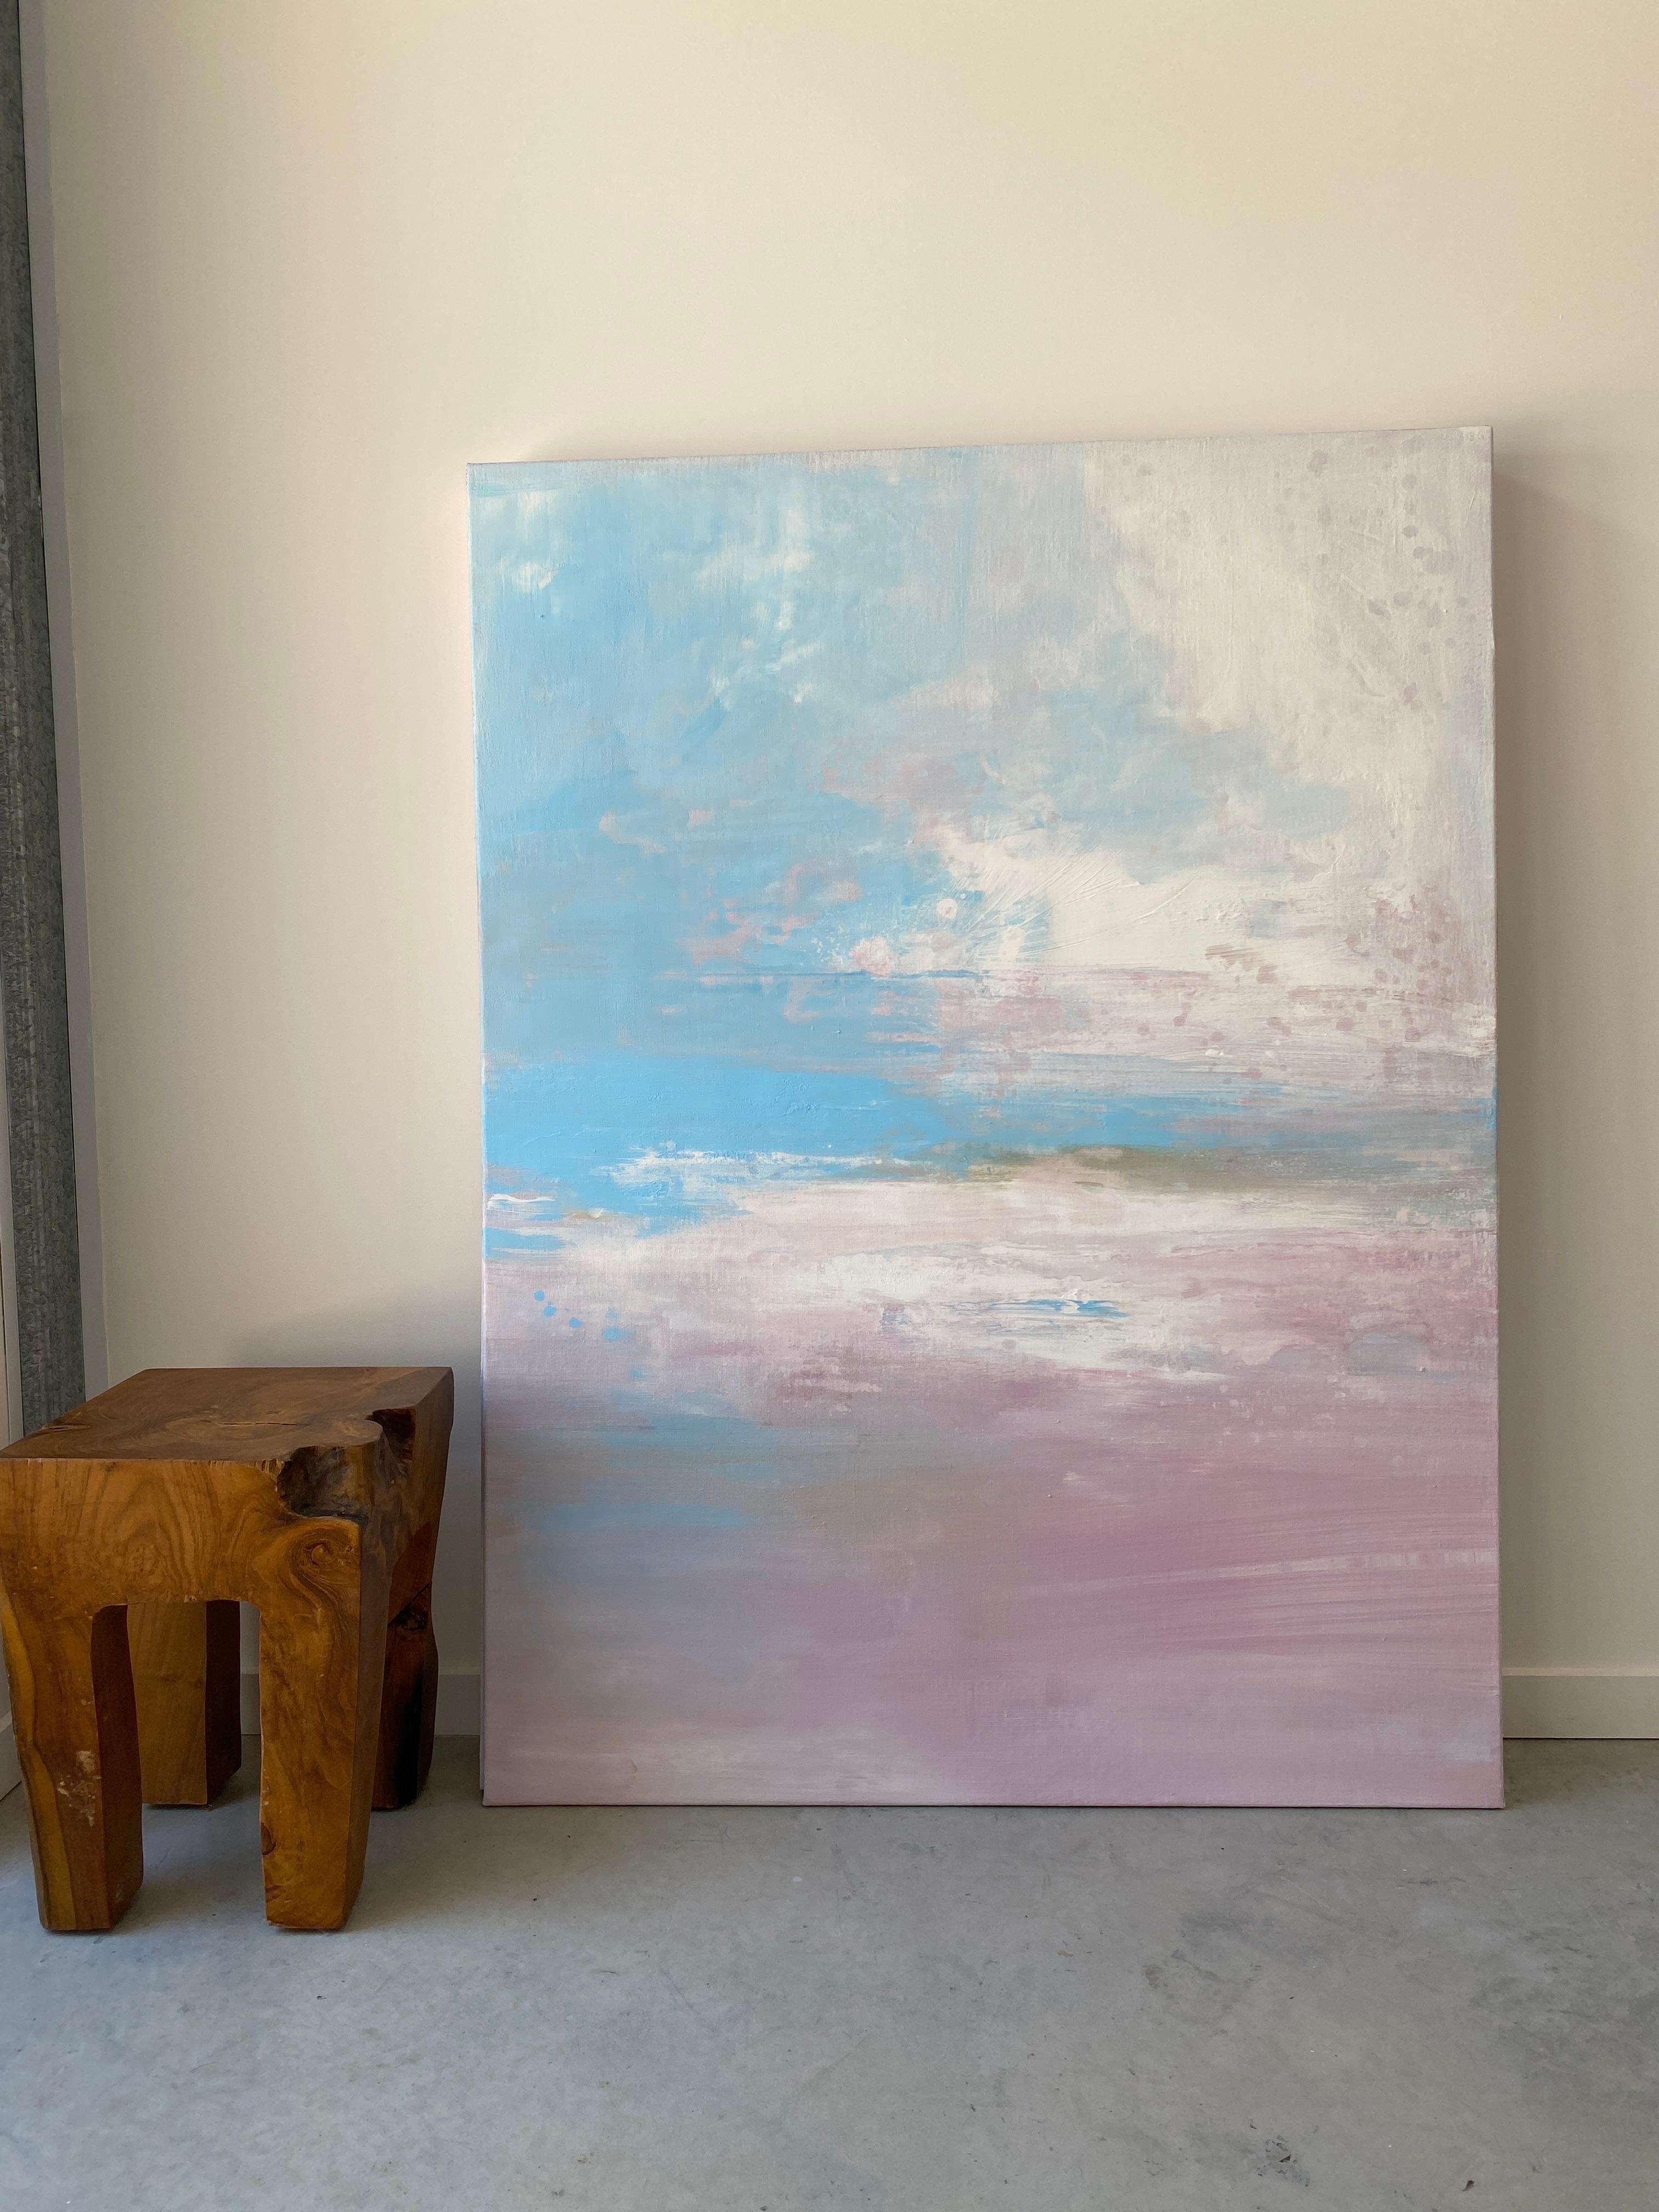 An abstract impressionist painting, capturing an ethereal of the Australian landscape, bursts of sky blue and earthy tones merge in a dance of colour and texture, embodying the raw, emotive forces of nature. I utilized acrylics to layer and blend,